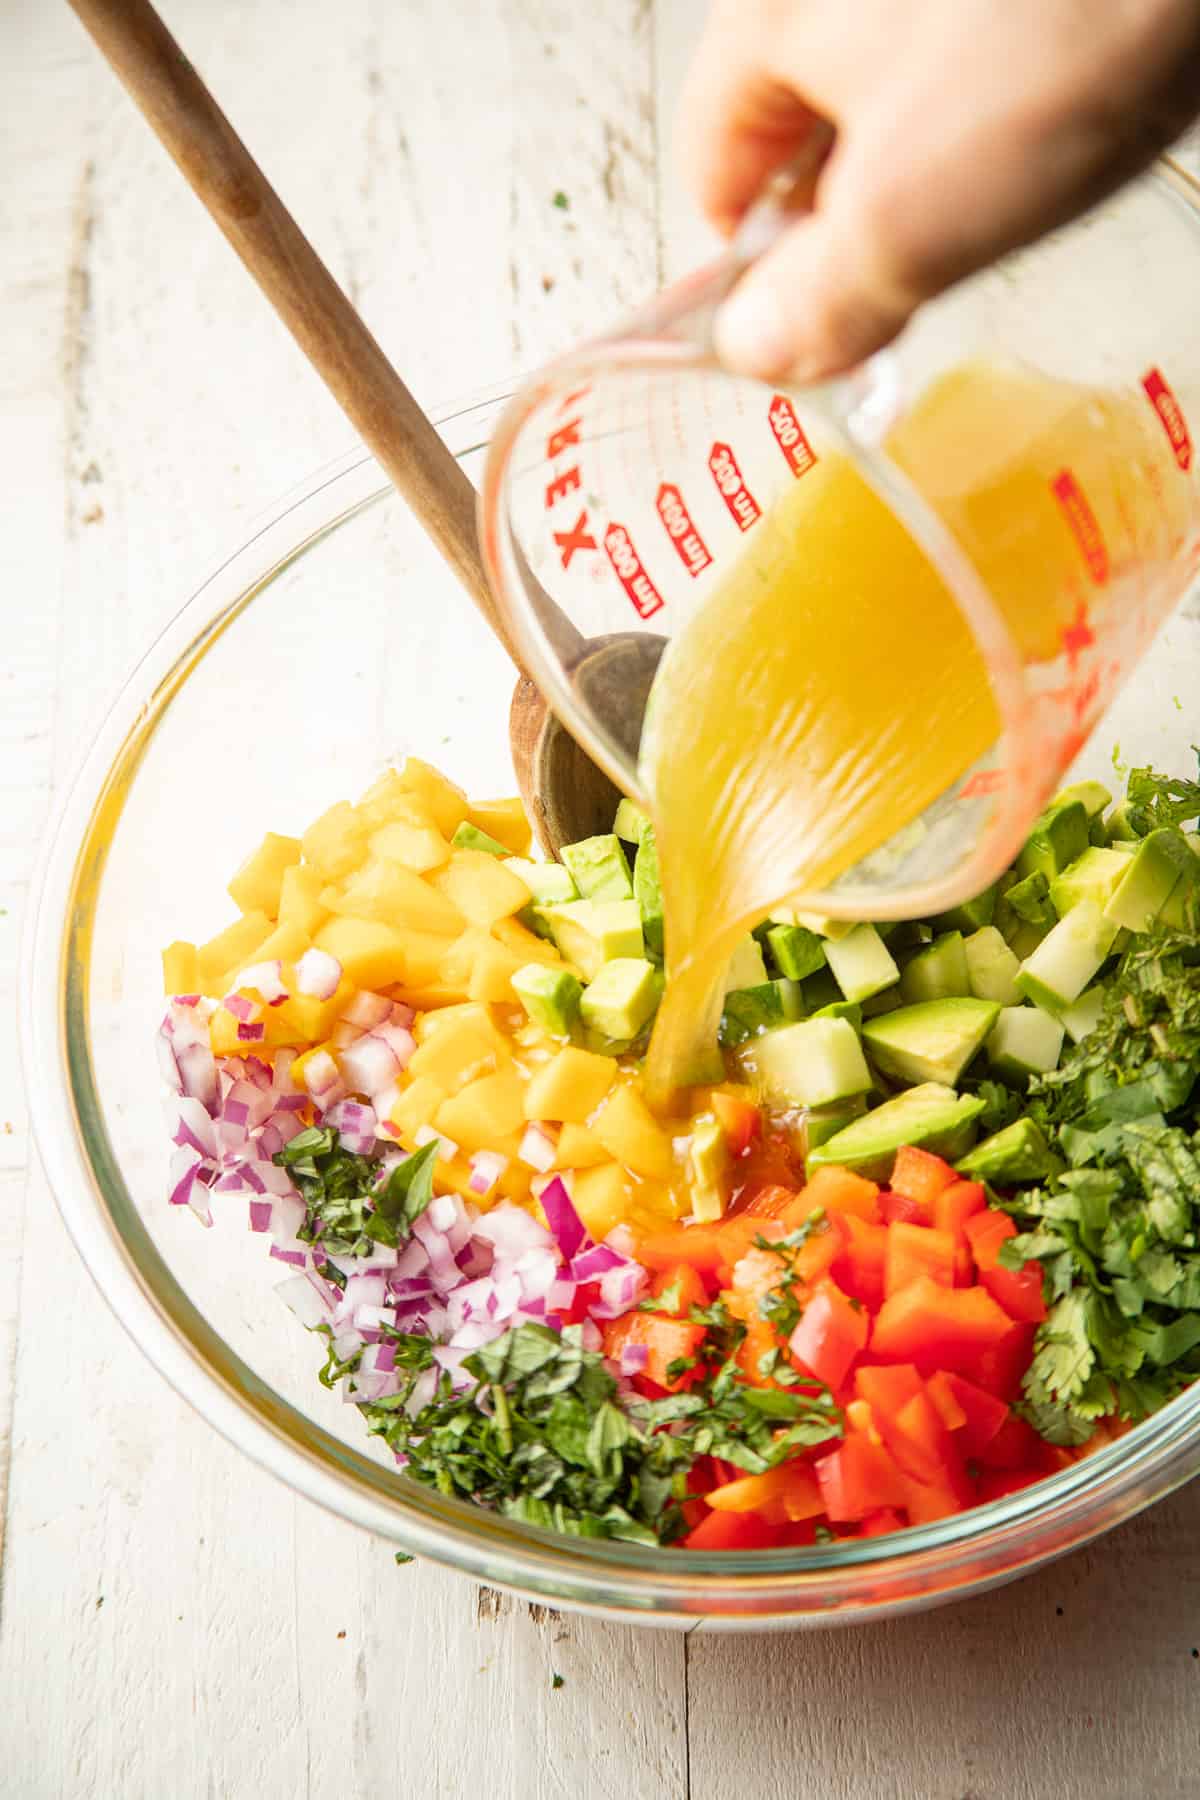 Hand pouring dressing over a bowl of mango salad.